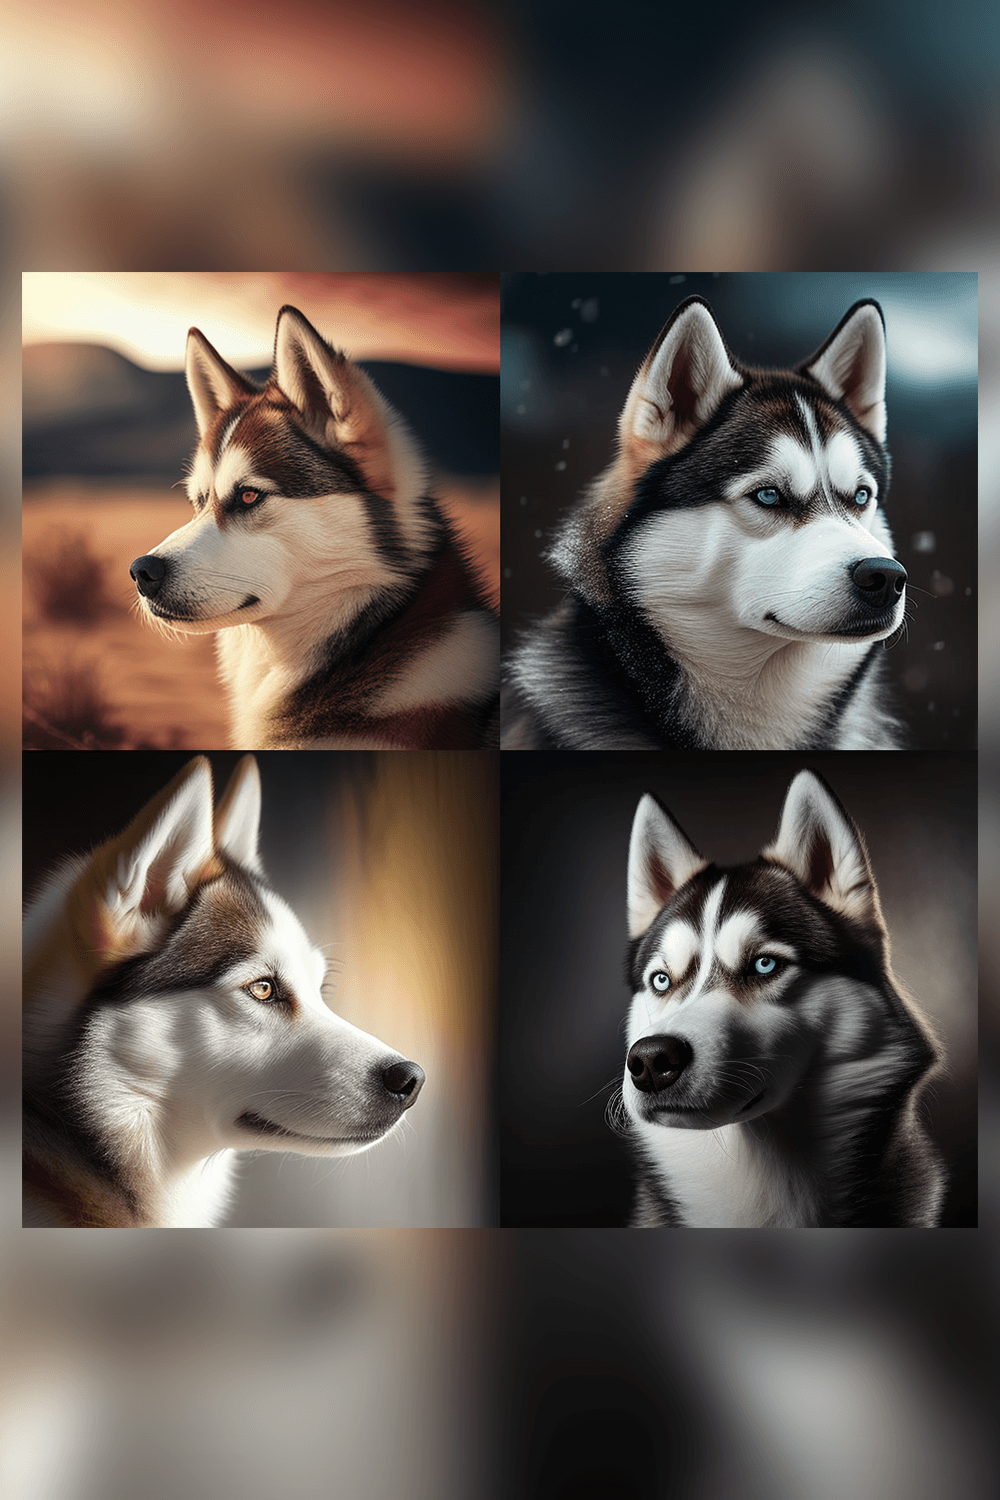 A series of photoshopped images of a husky dog.